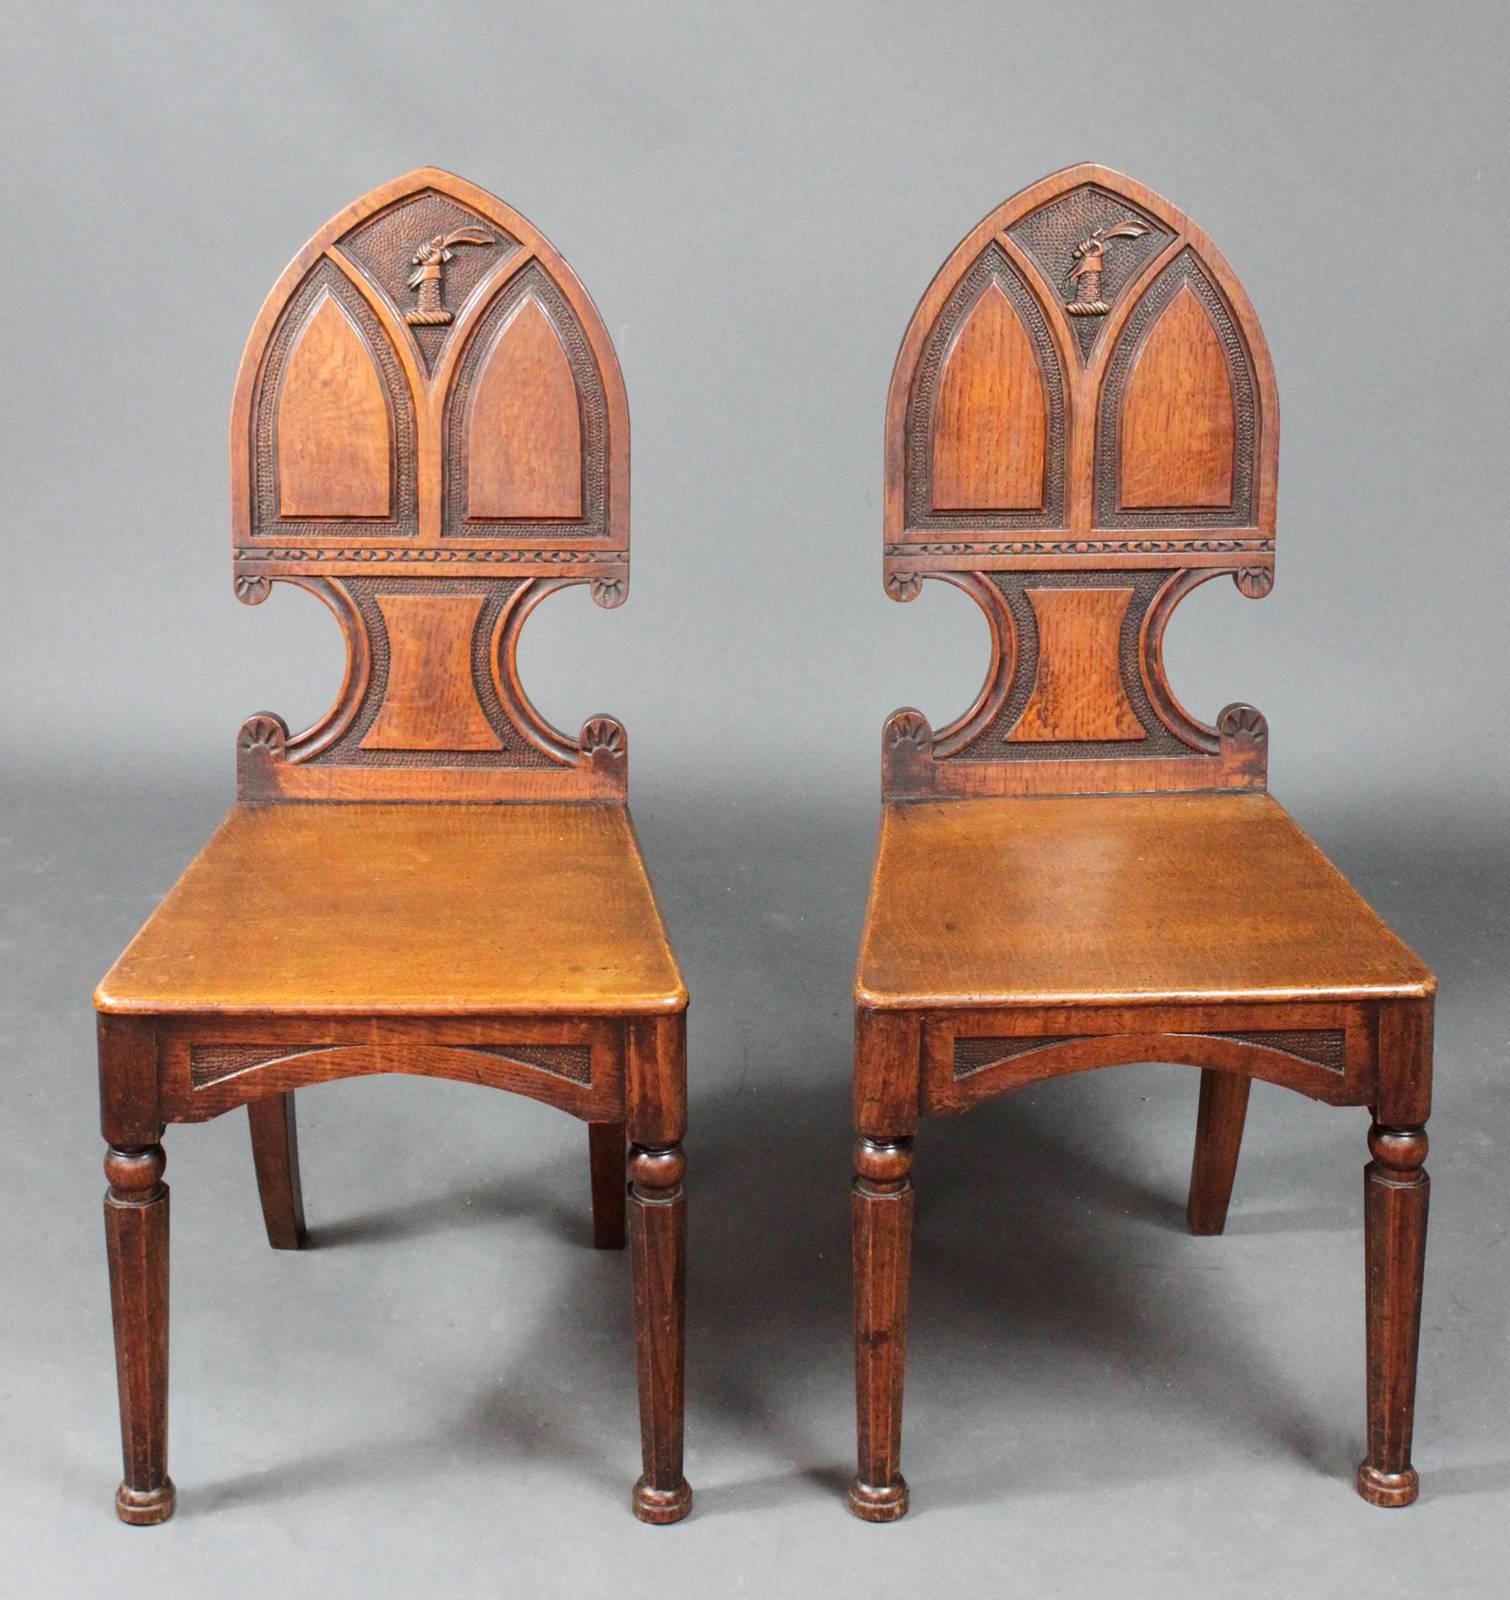 A good pair of oak Gothic hall chairs with a well carved family crest of a gauntletted arm holding a sabre aloft. Original condition.